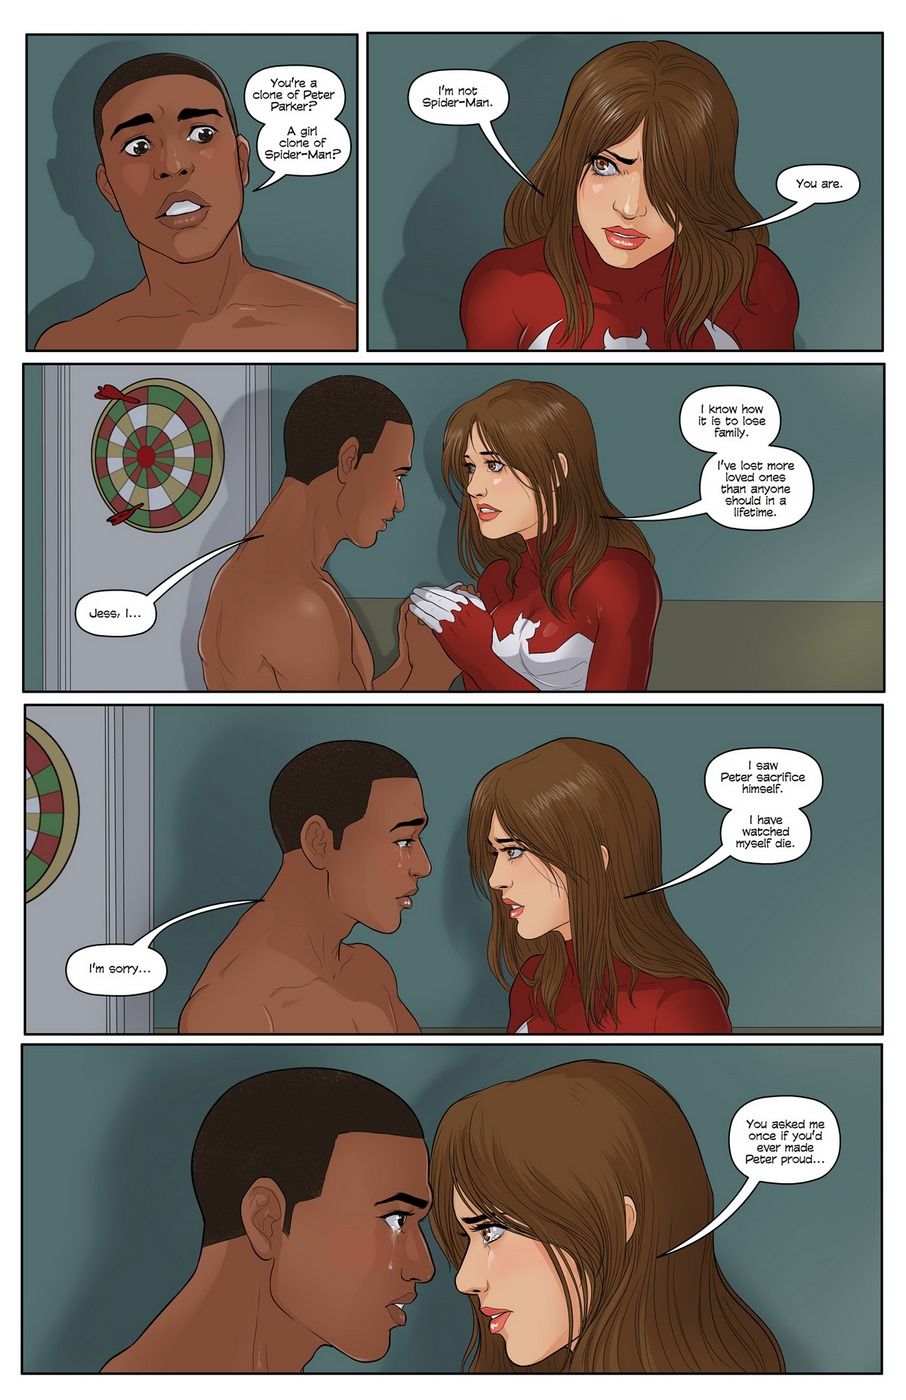 Edge of Spidercest - All New Spiderman page 4